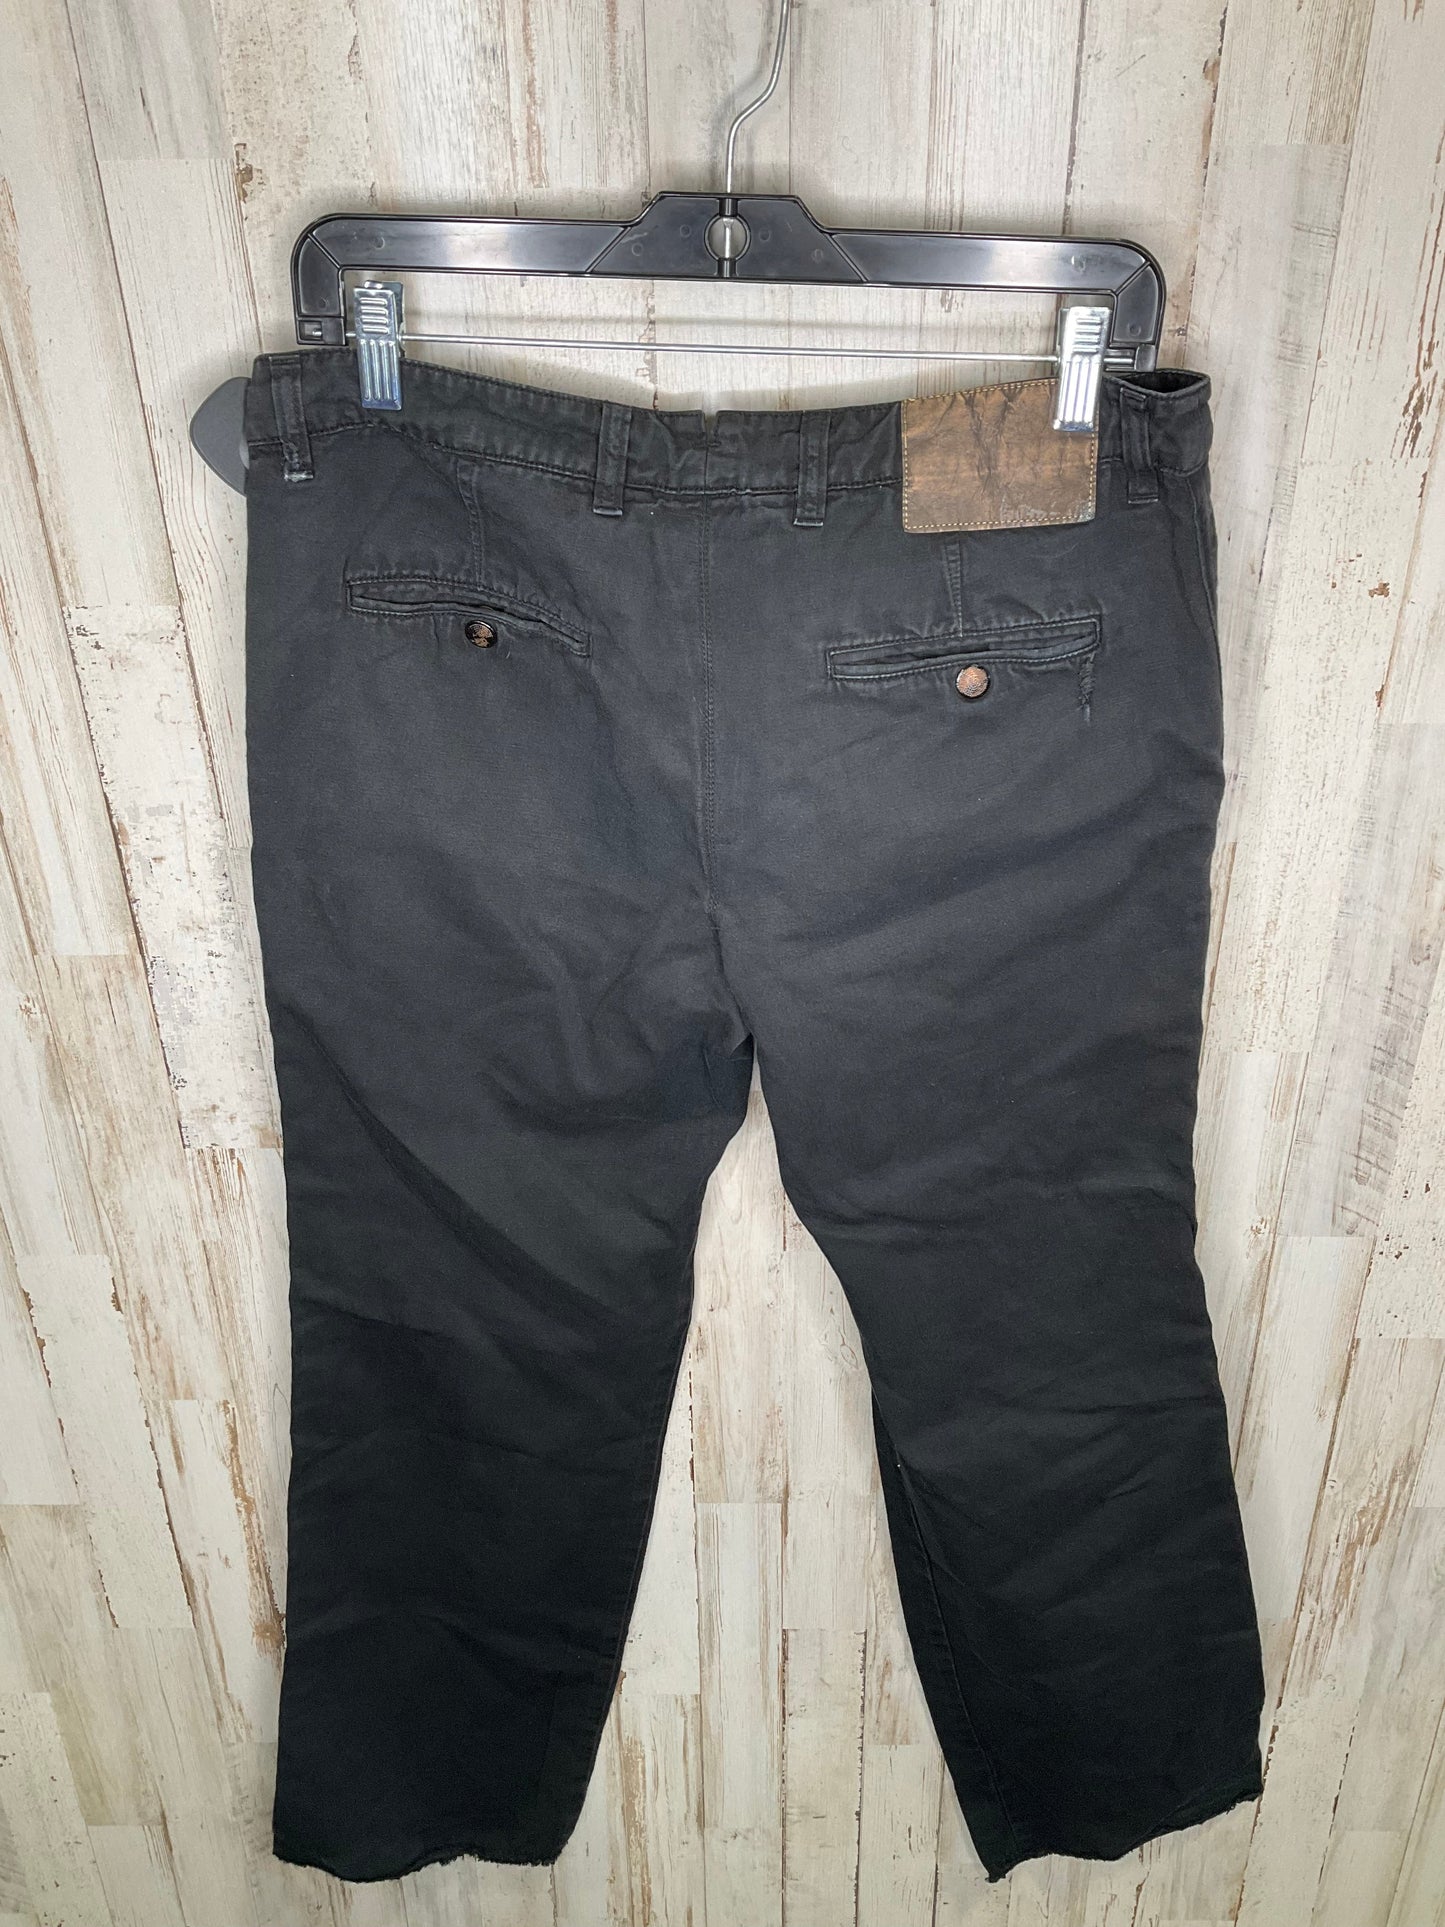 Jeans Boot Cut By Golden Goose  Size: 10